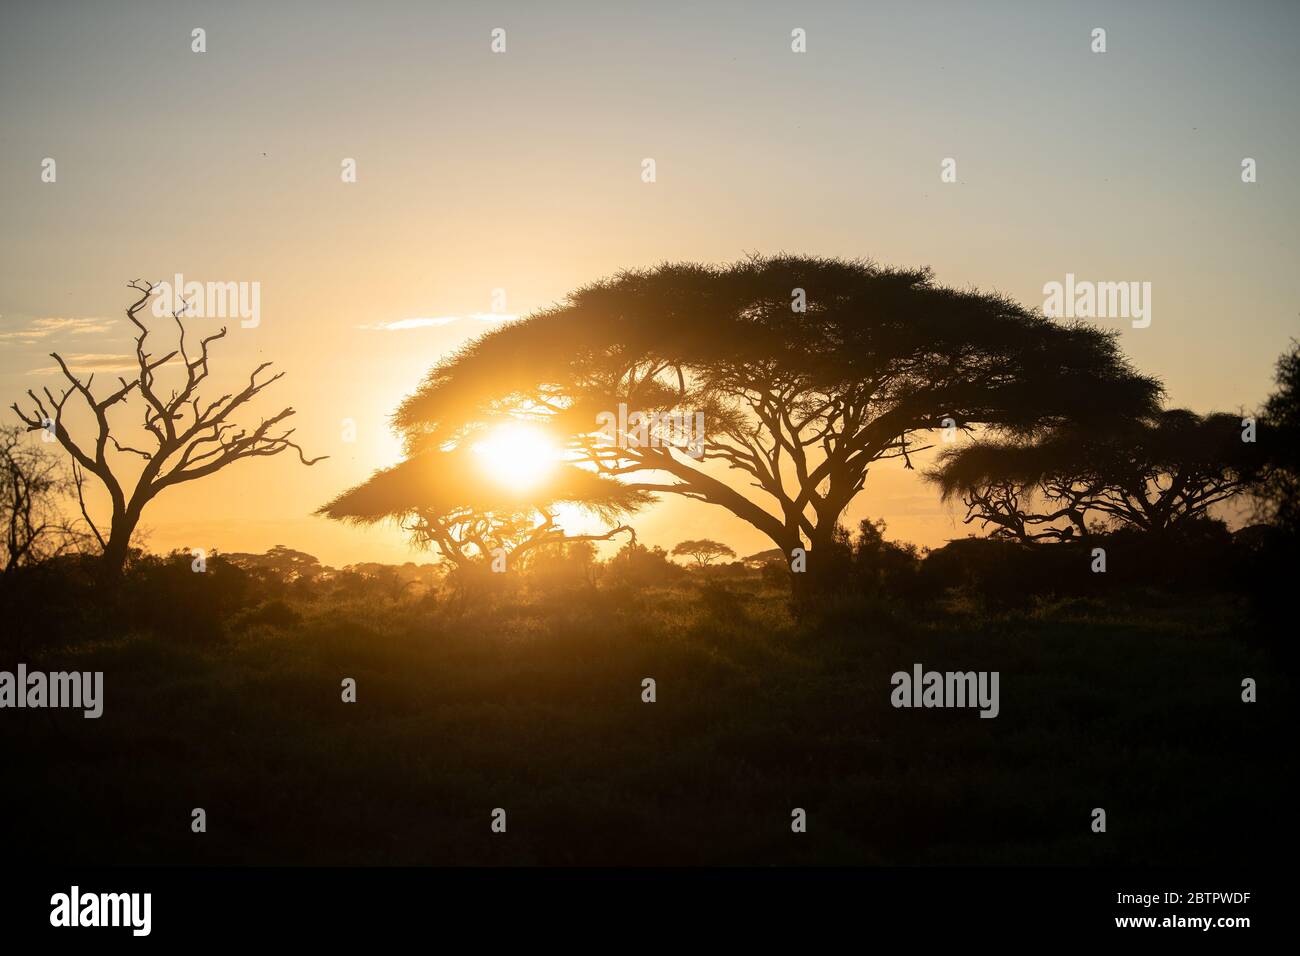 silhouette of acacia tree in amboseli national park, Kenya at sunset time. Stock Photo